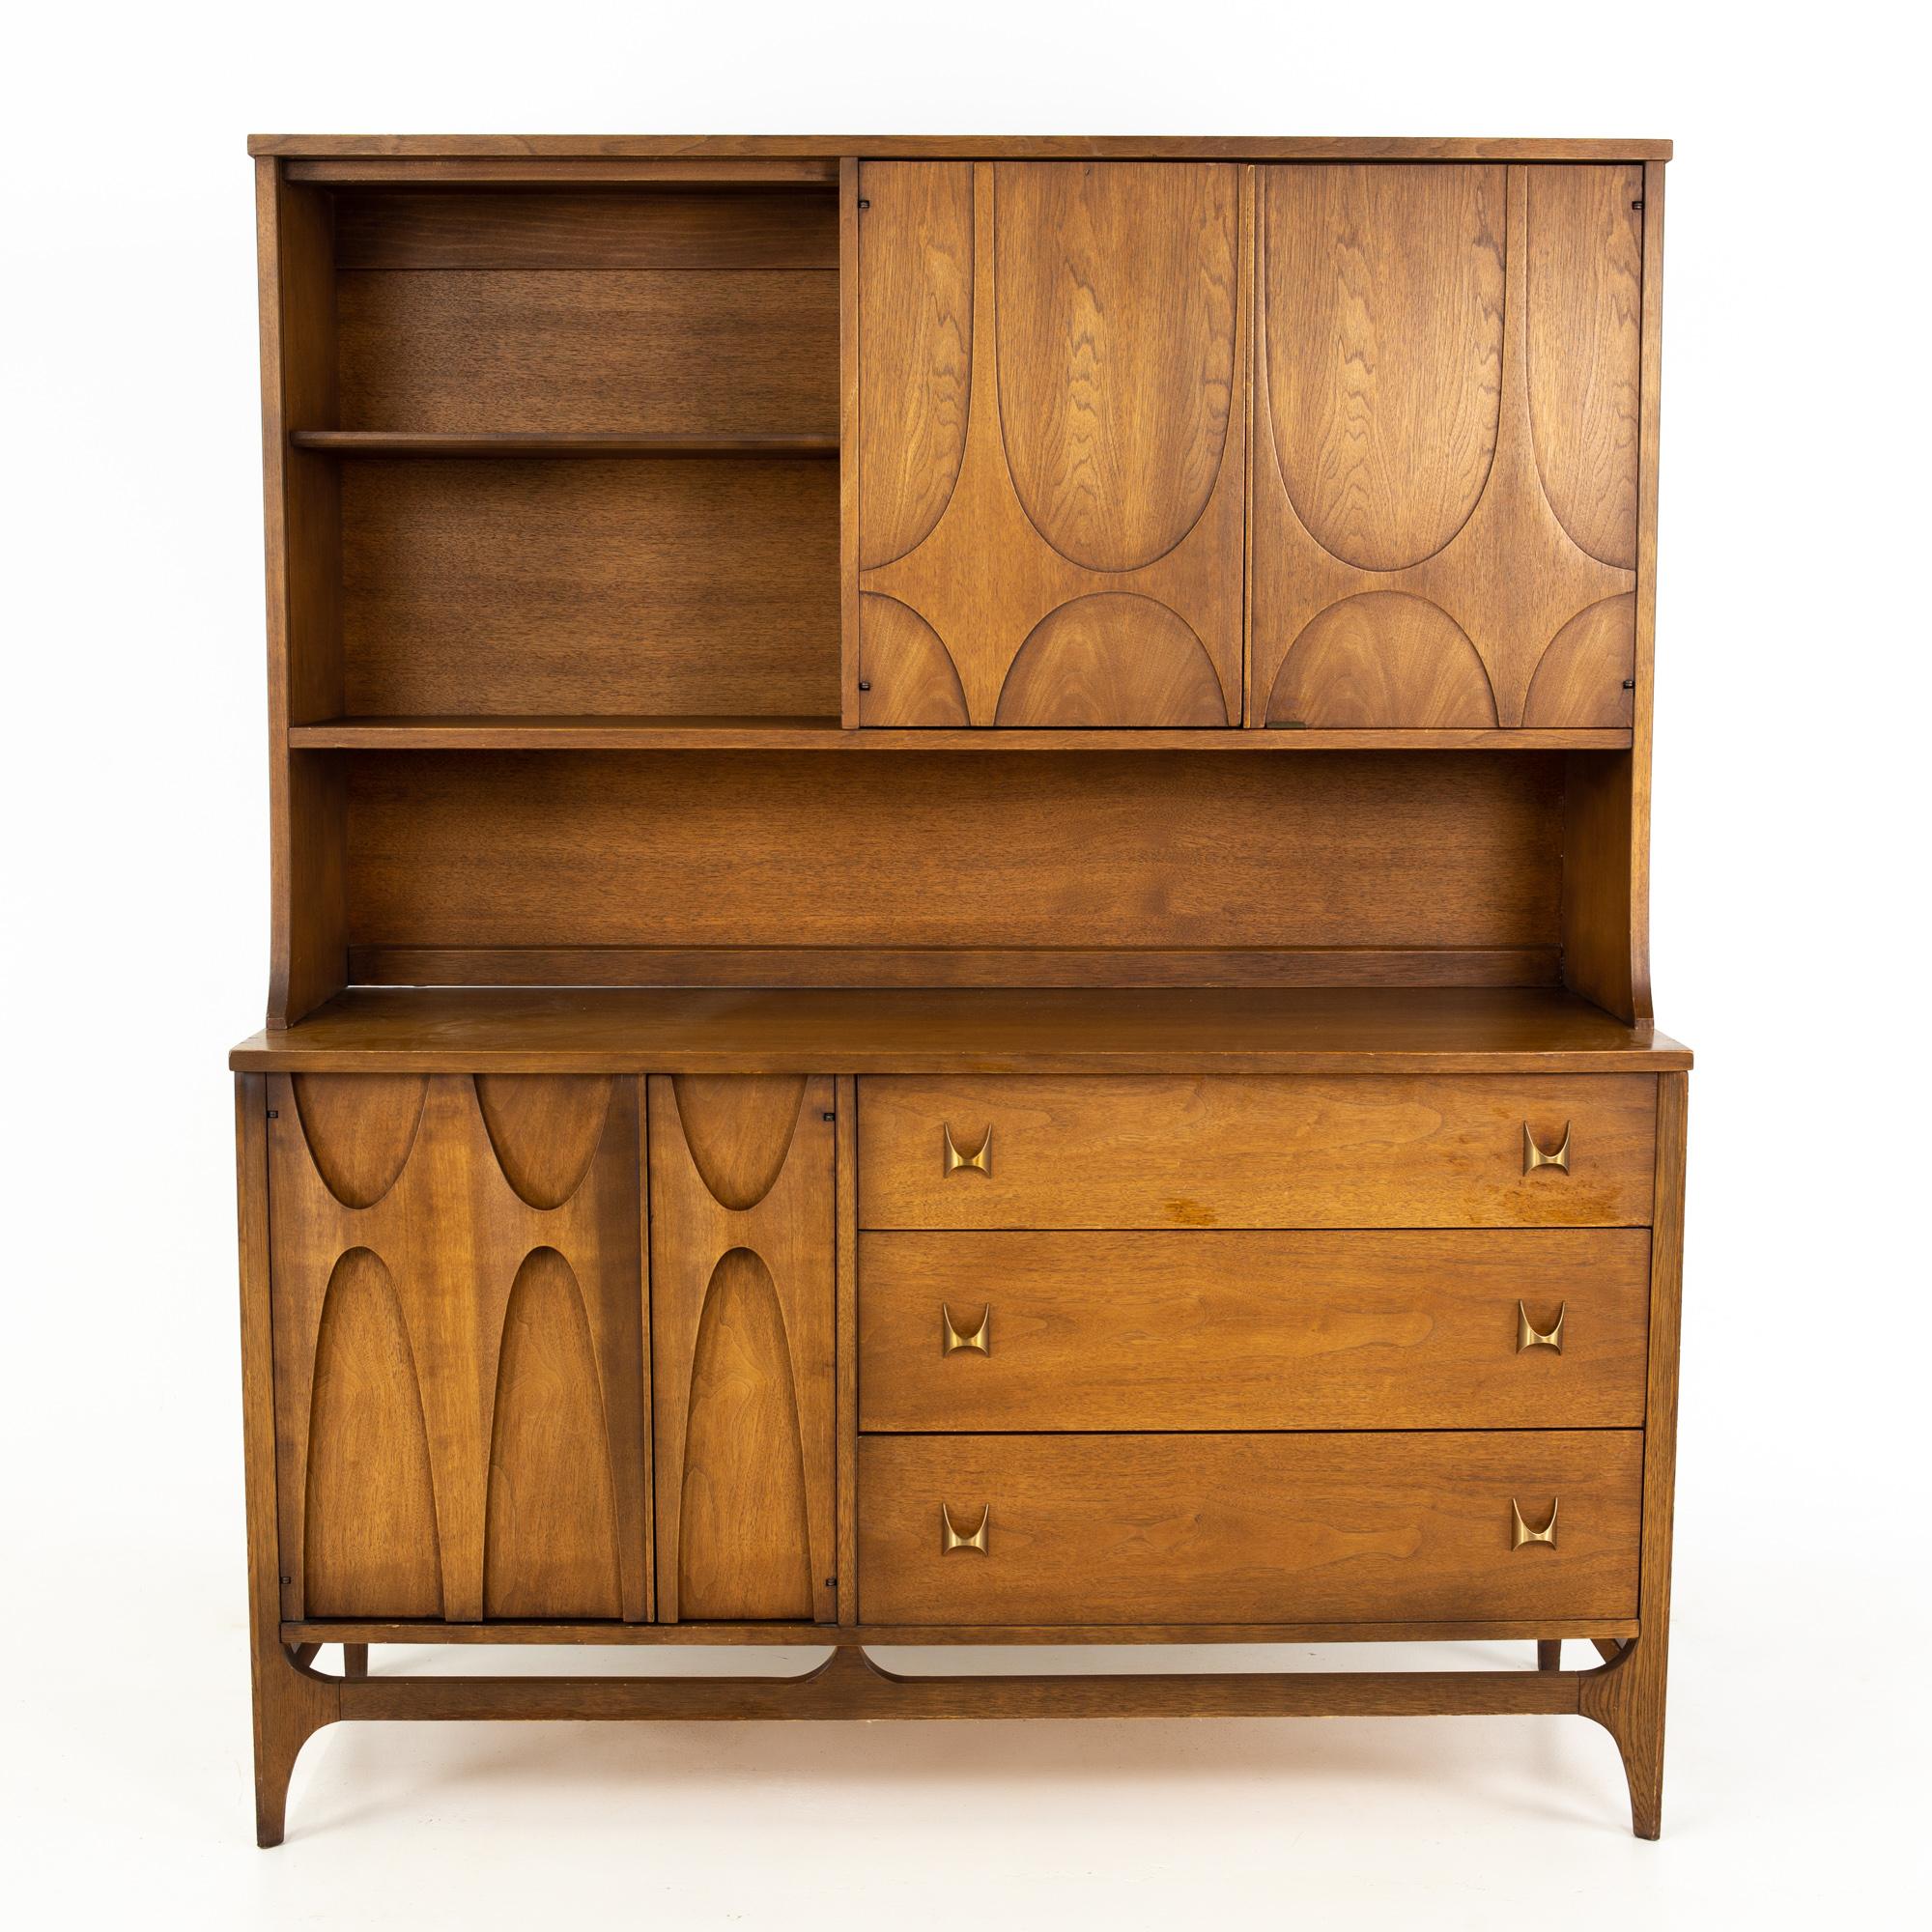 Broyhill Brasilia Brutalist mid-century offset walnut sideboard credenza buffet and hutch

Buffet and hutch measures: 54 wide x 19 deep x 65 inches high

Buffet measures: 54 wide x 19 deep x 31 inches high
Hutch measures: 53 wide x 12 deep x 34